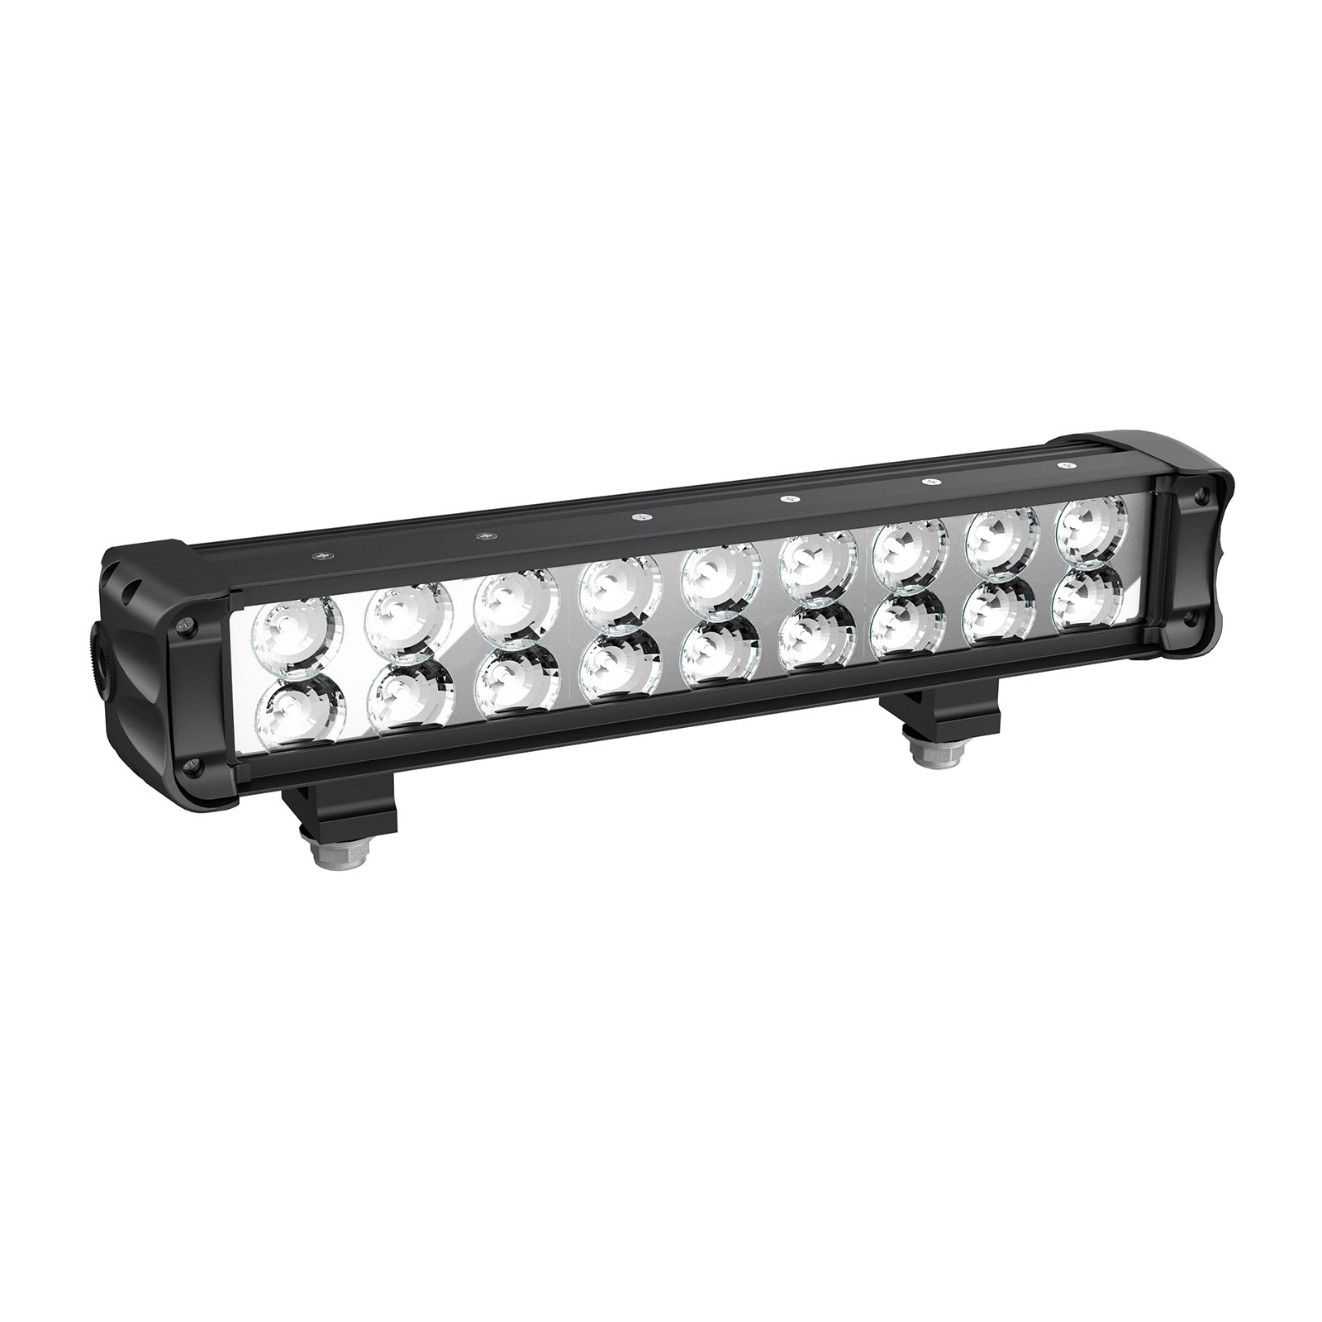 15 (38 CM) DOUBLE STACKED LED LIGHT BAR (90 WATTS)